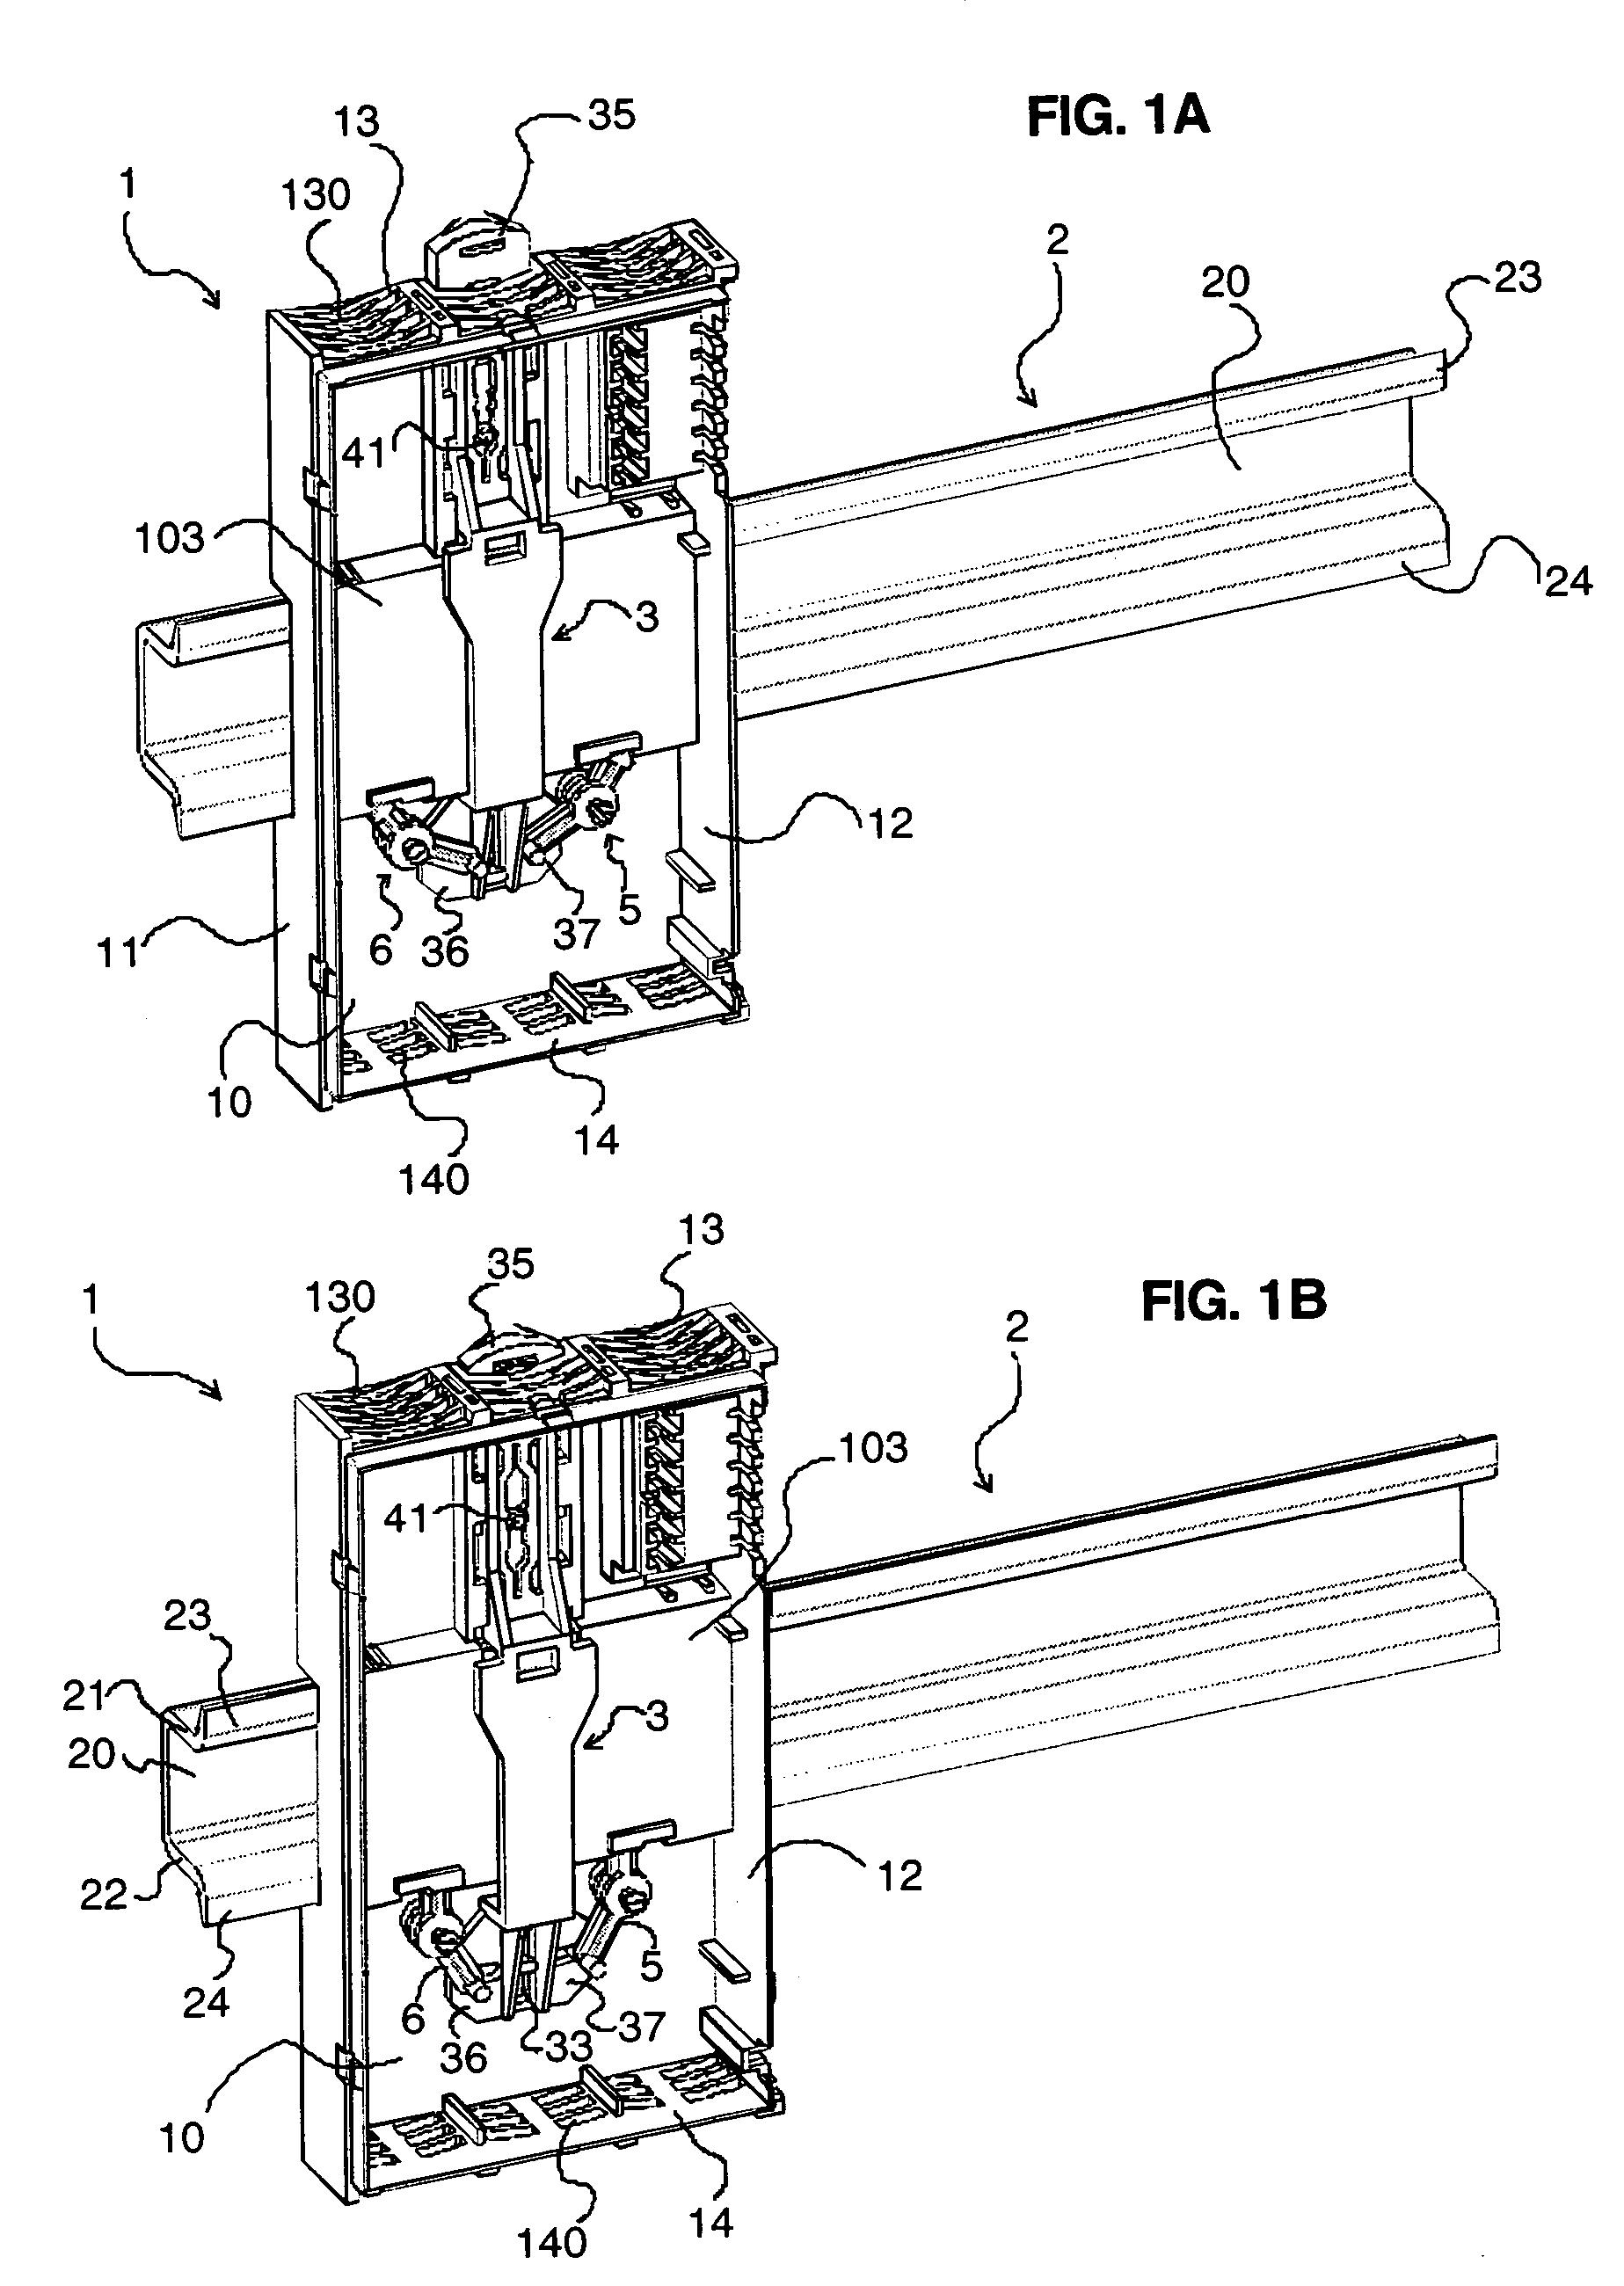 Device for locking an electric apparatus onto a supporting rail